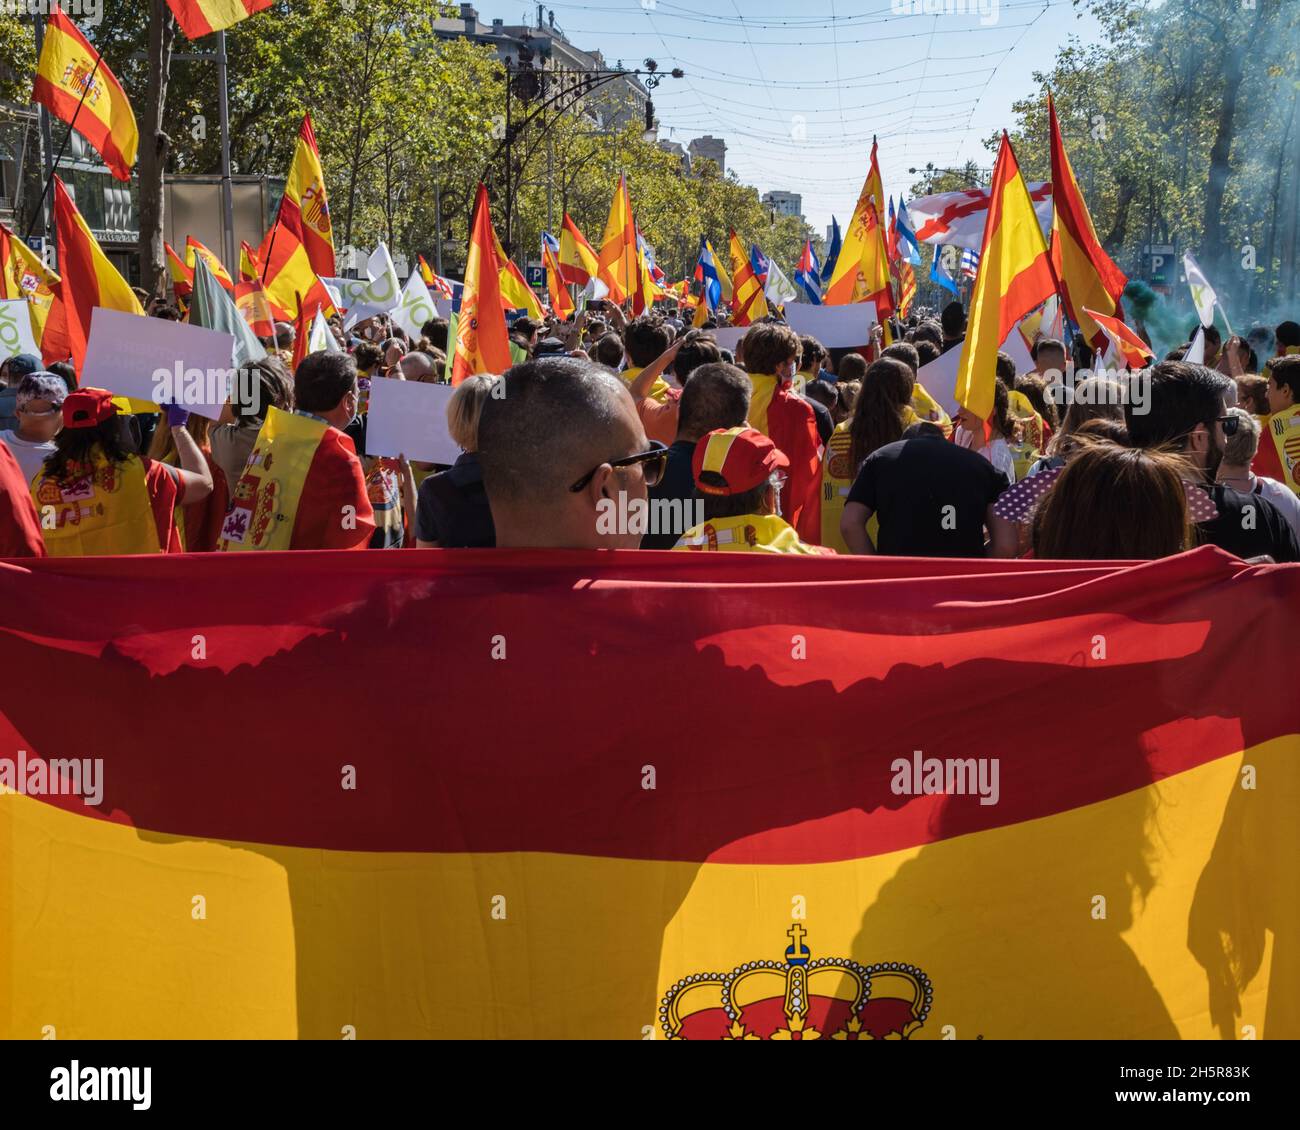 October 12th, 2021, Spain's National Day, better known as Hispanic Day: rear view of a man walking through the crowd and holding the Spanish flag. Stock Photo